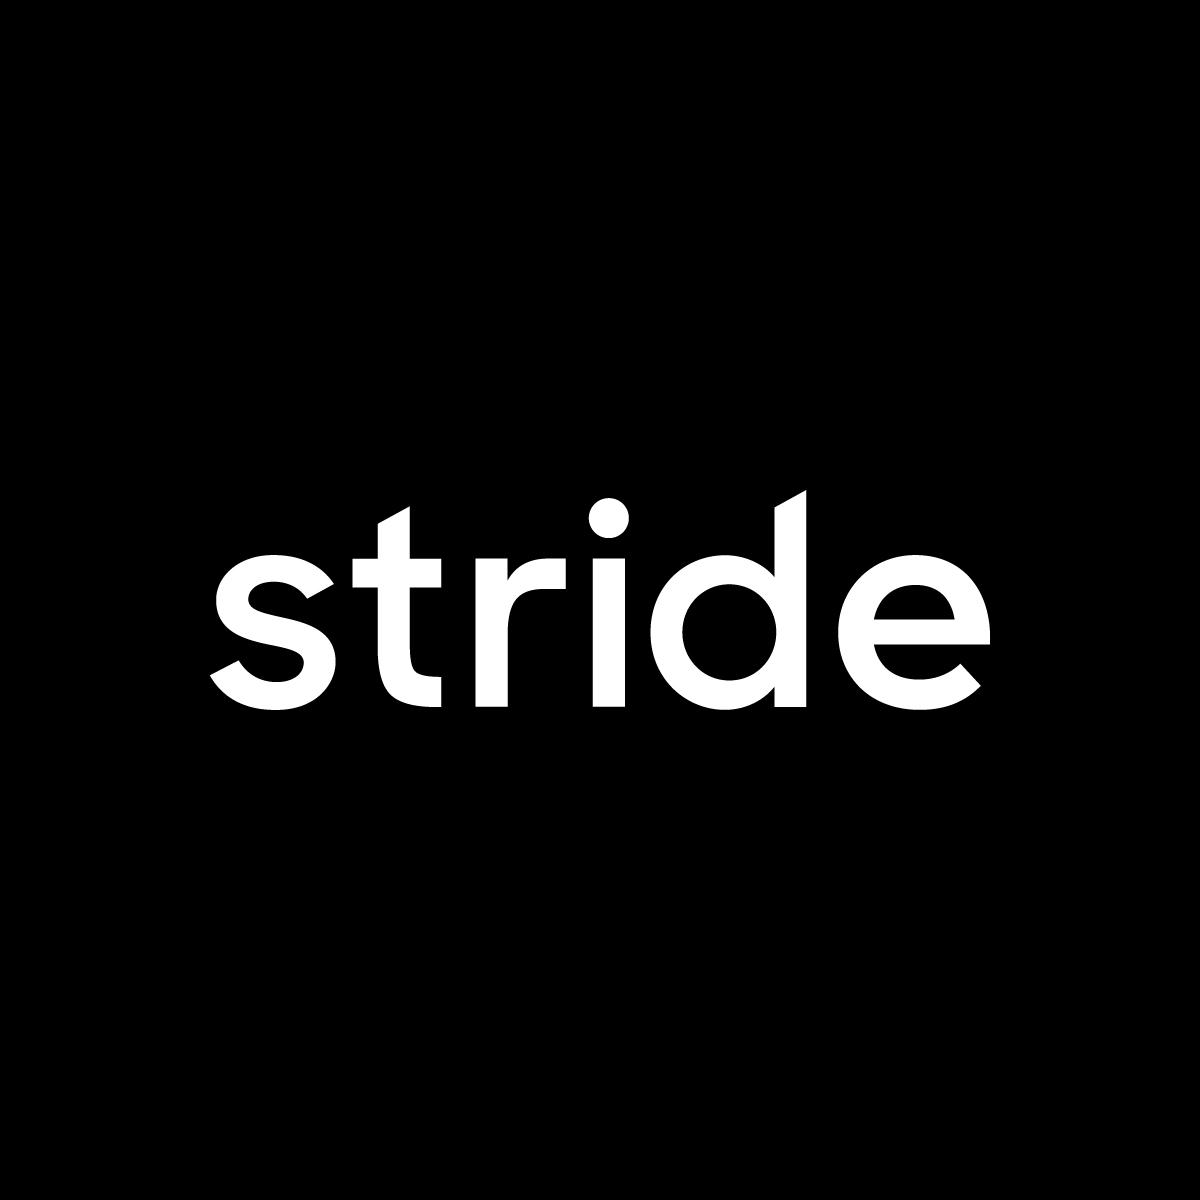 Stride Digital profile on Qualified.One